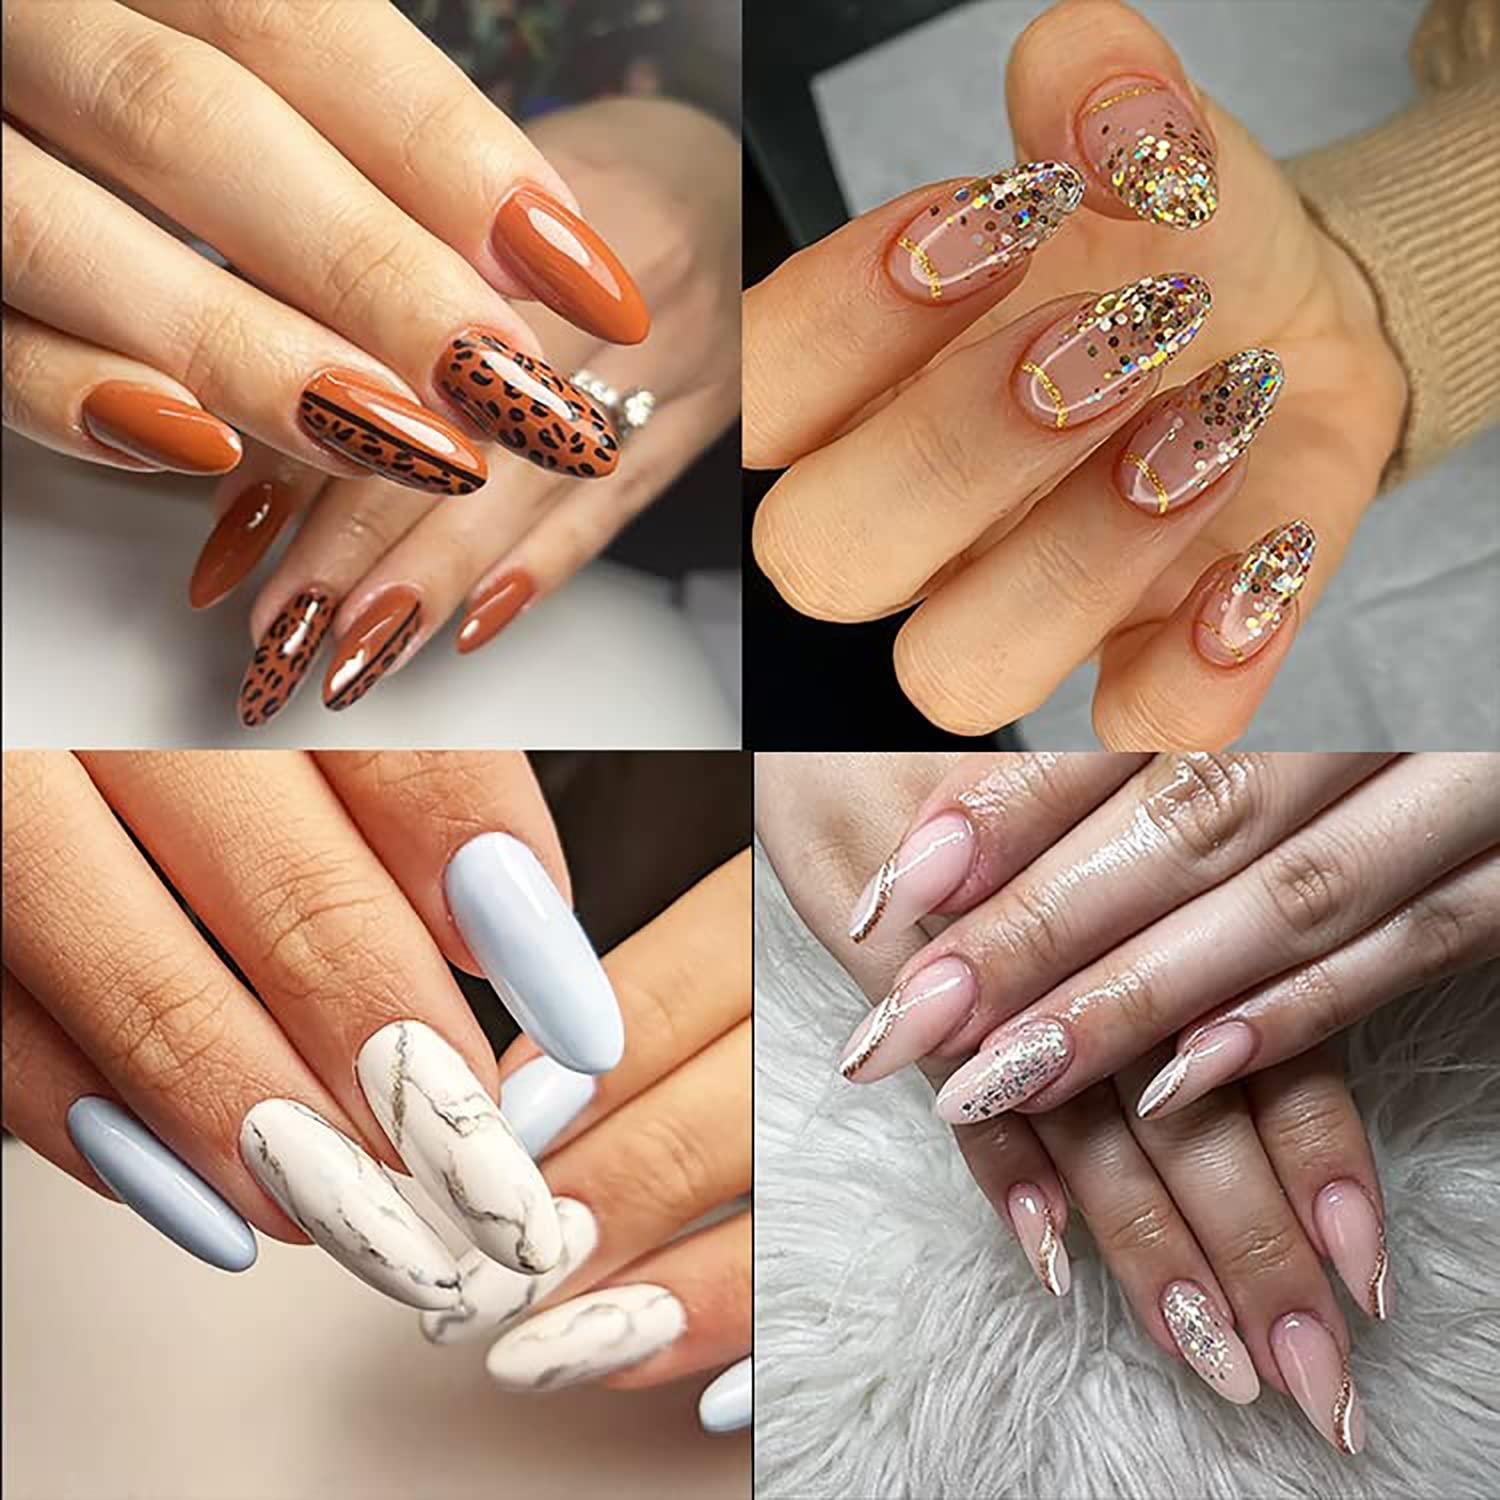 What's the Difference Between Acrylic Nails and Gel Nails?